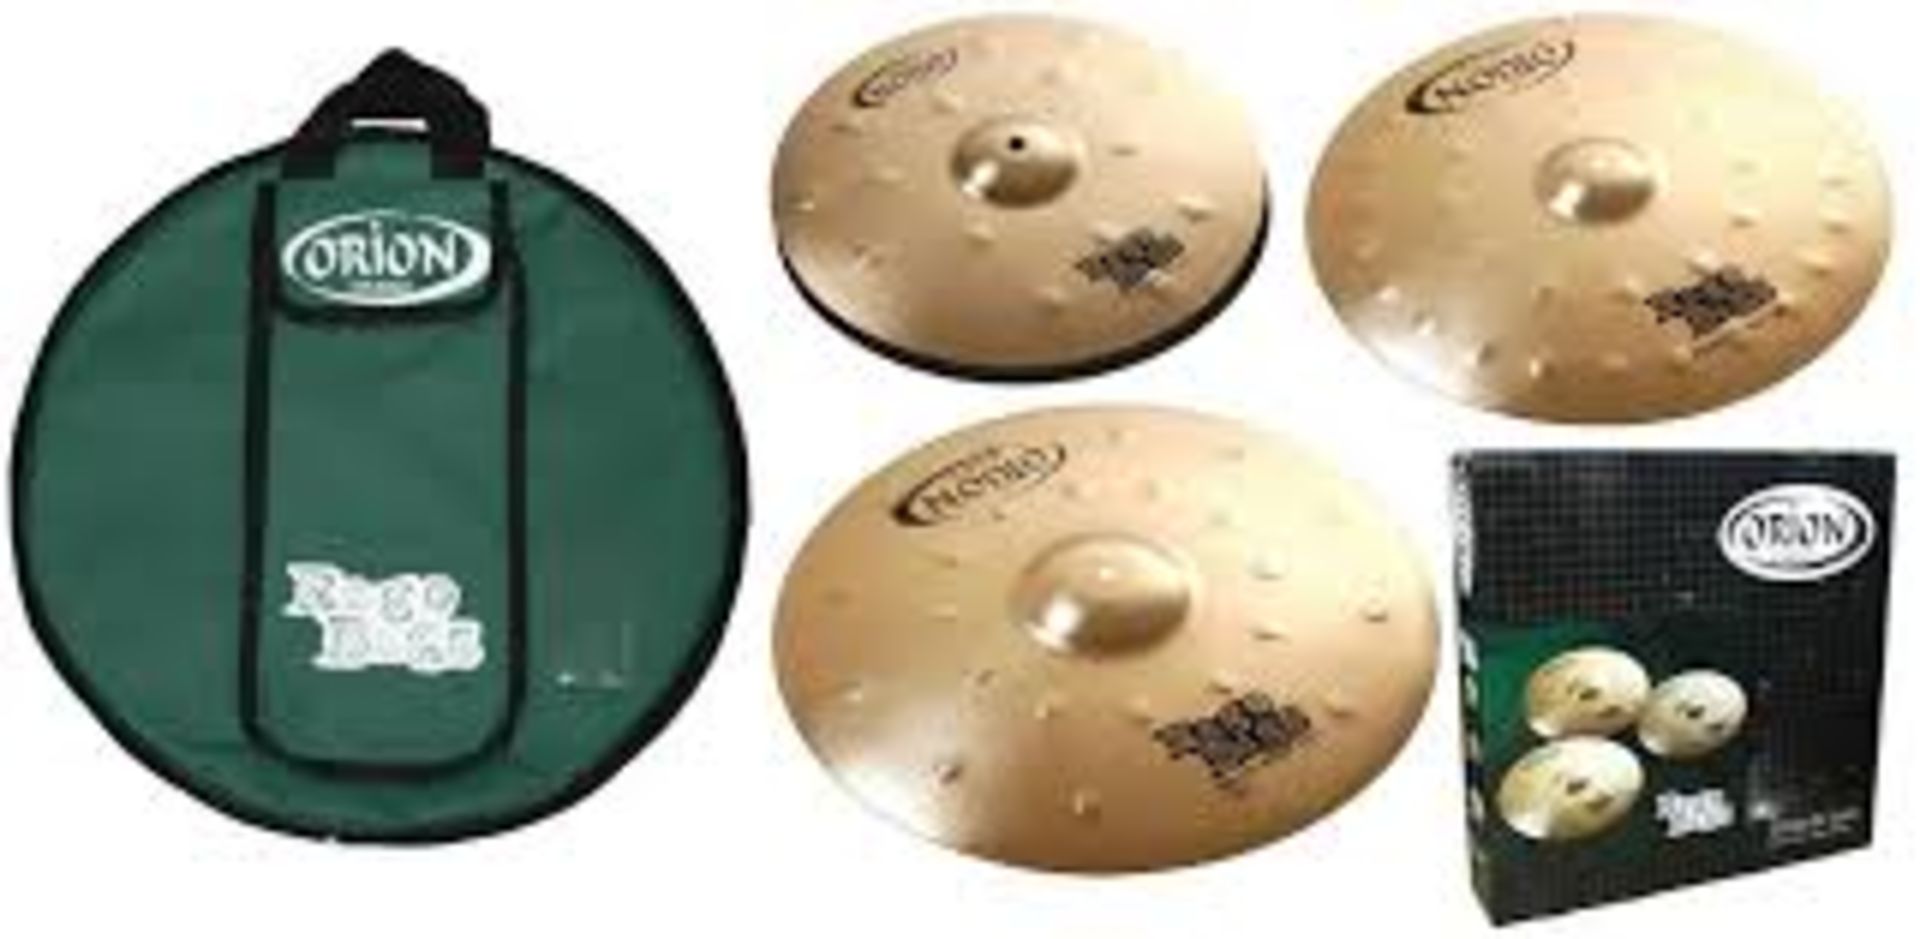 BRAND NEW ORION CYMBALS RB90 BO8 ALLOY CYMBAL